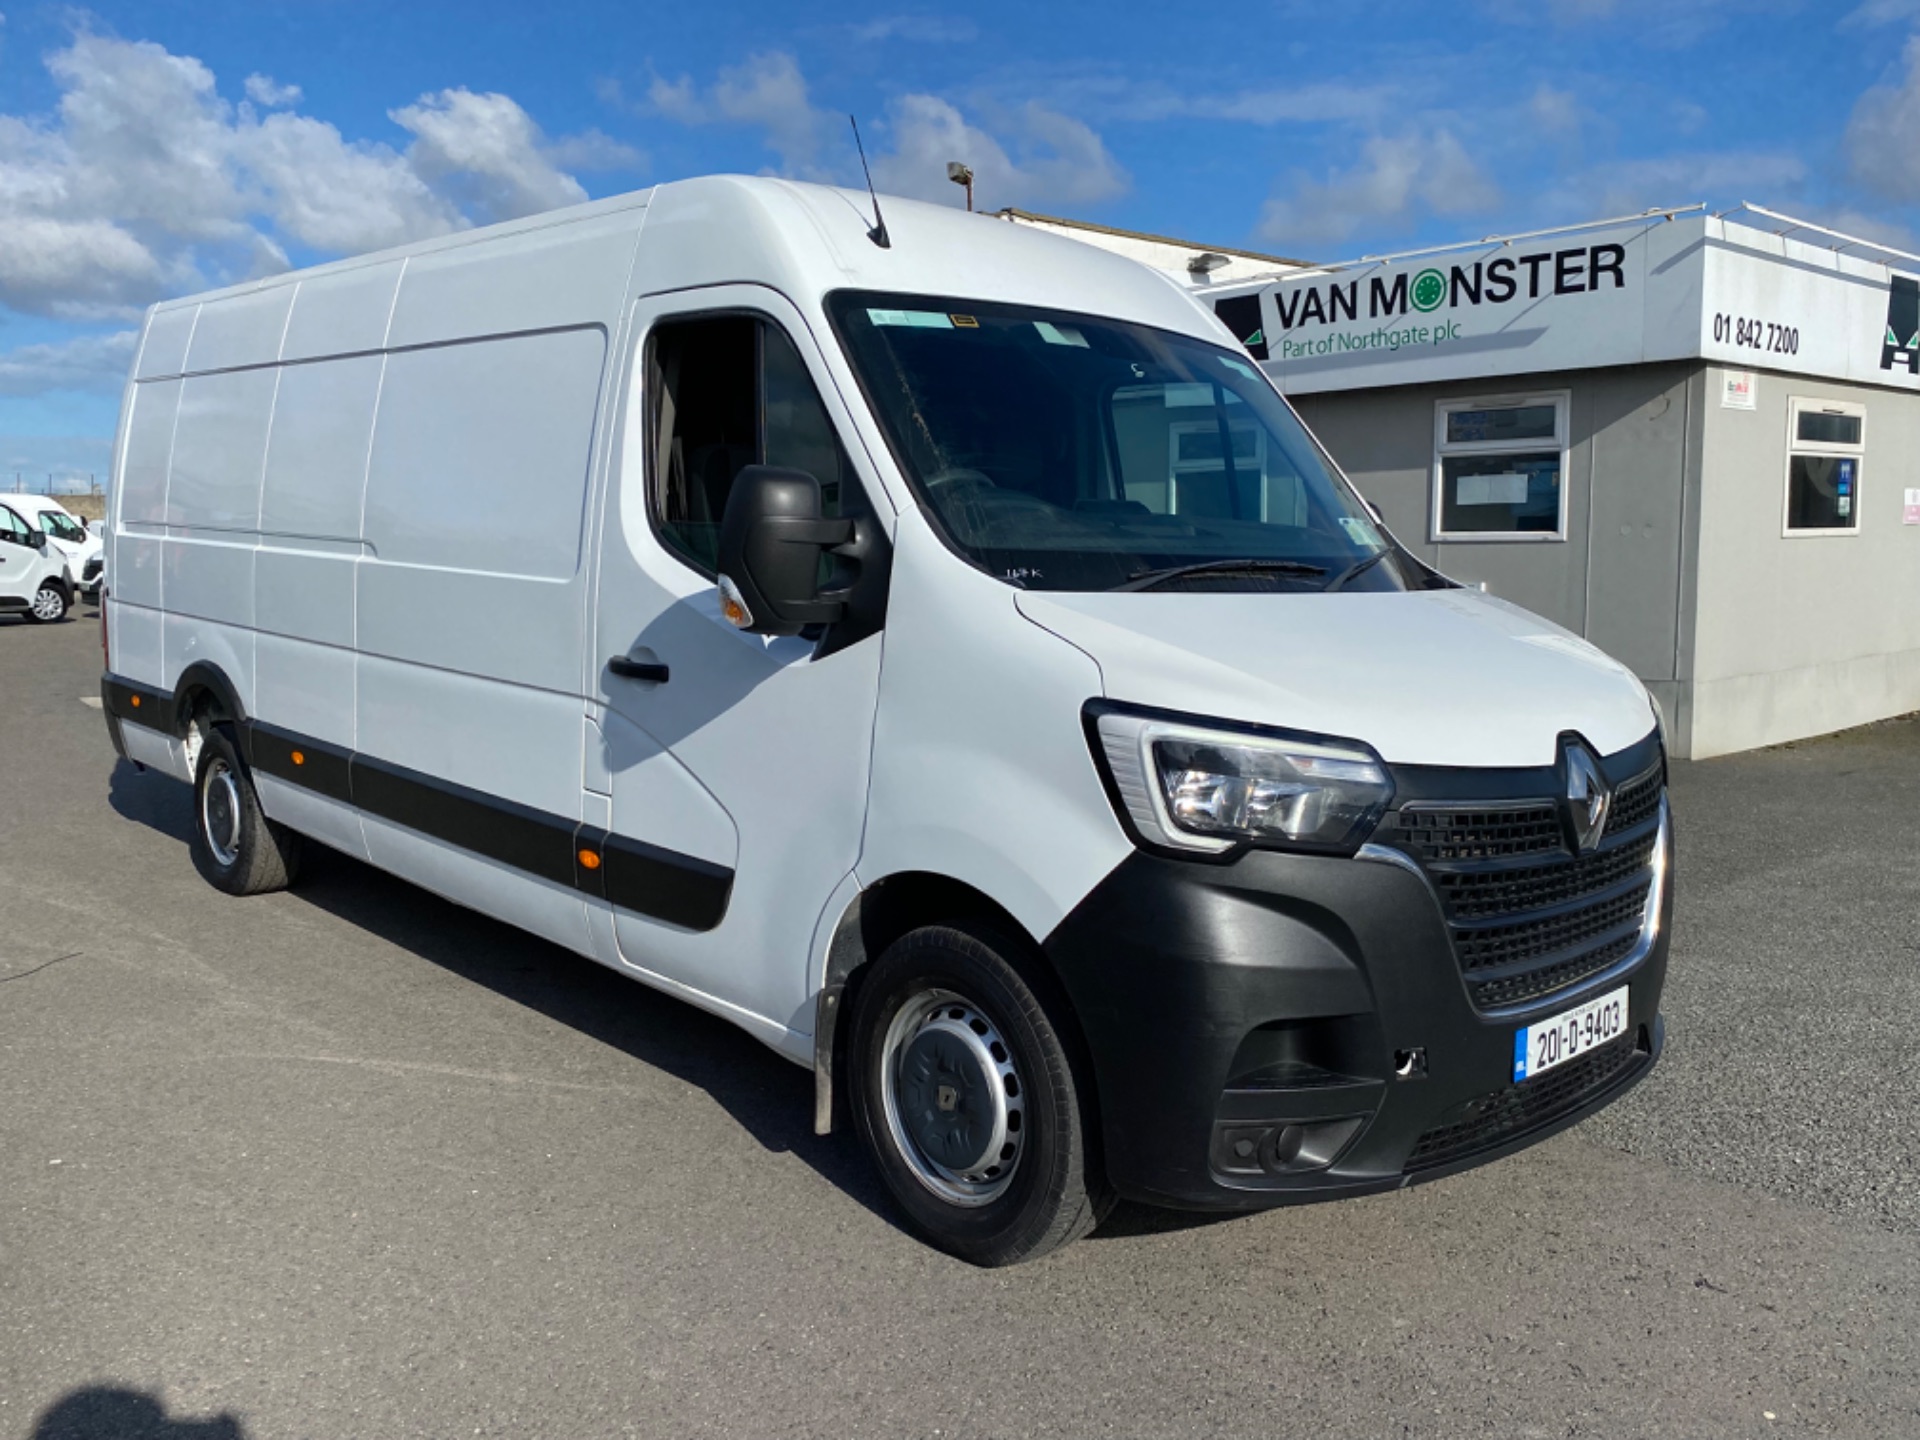 2020 Renault Master RWD LML35 DCI 130 Business MY1 (201D9403)